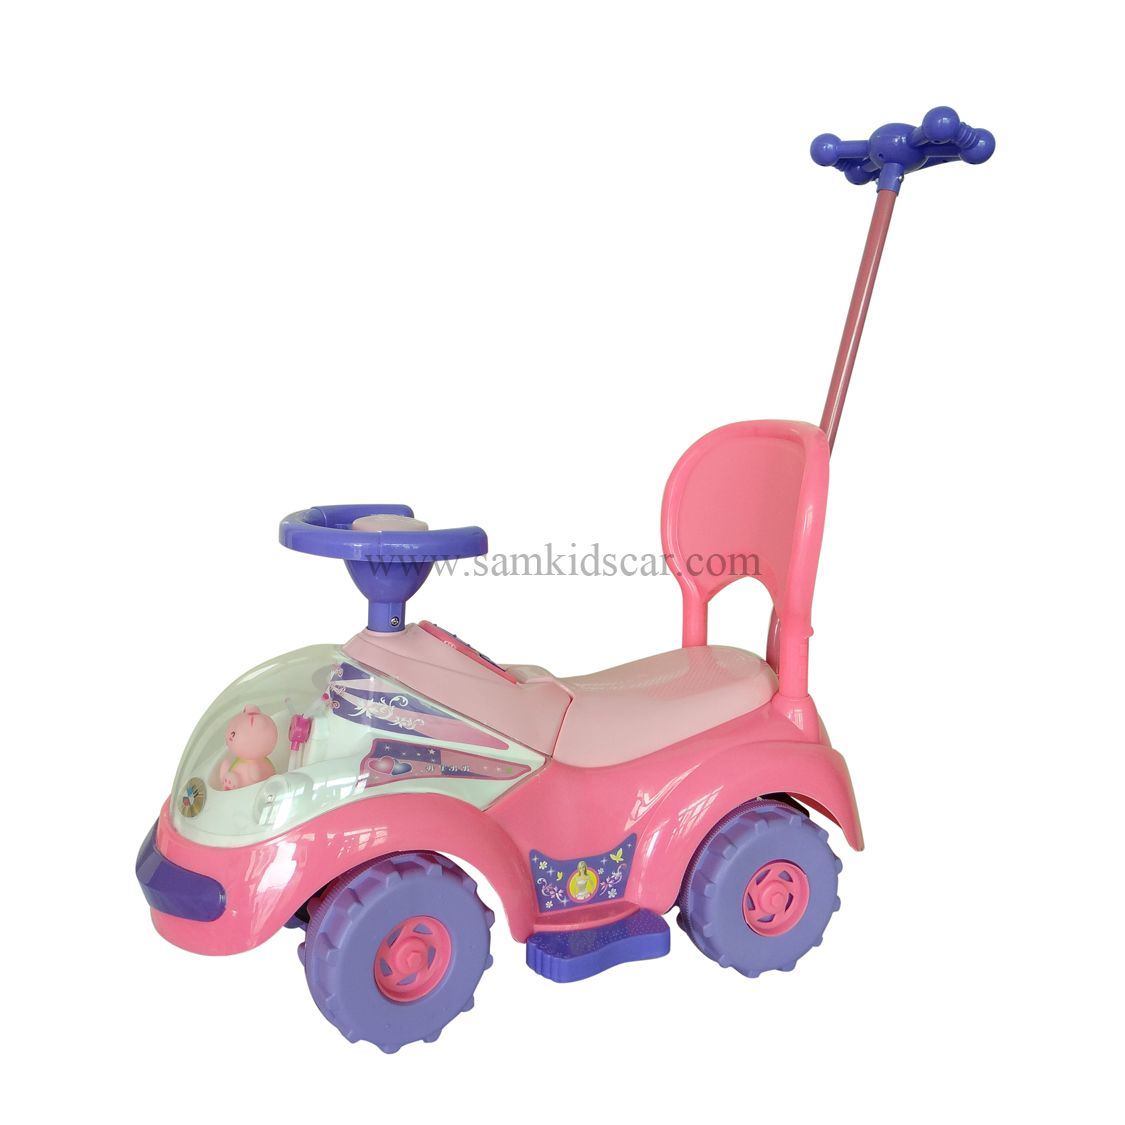 Car for Toddlers to Ride on 993-Bf2